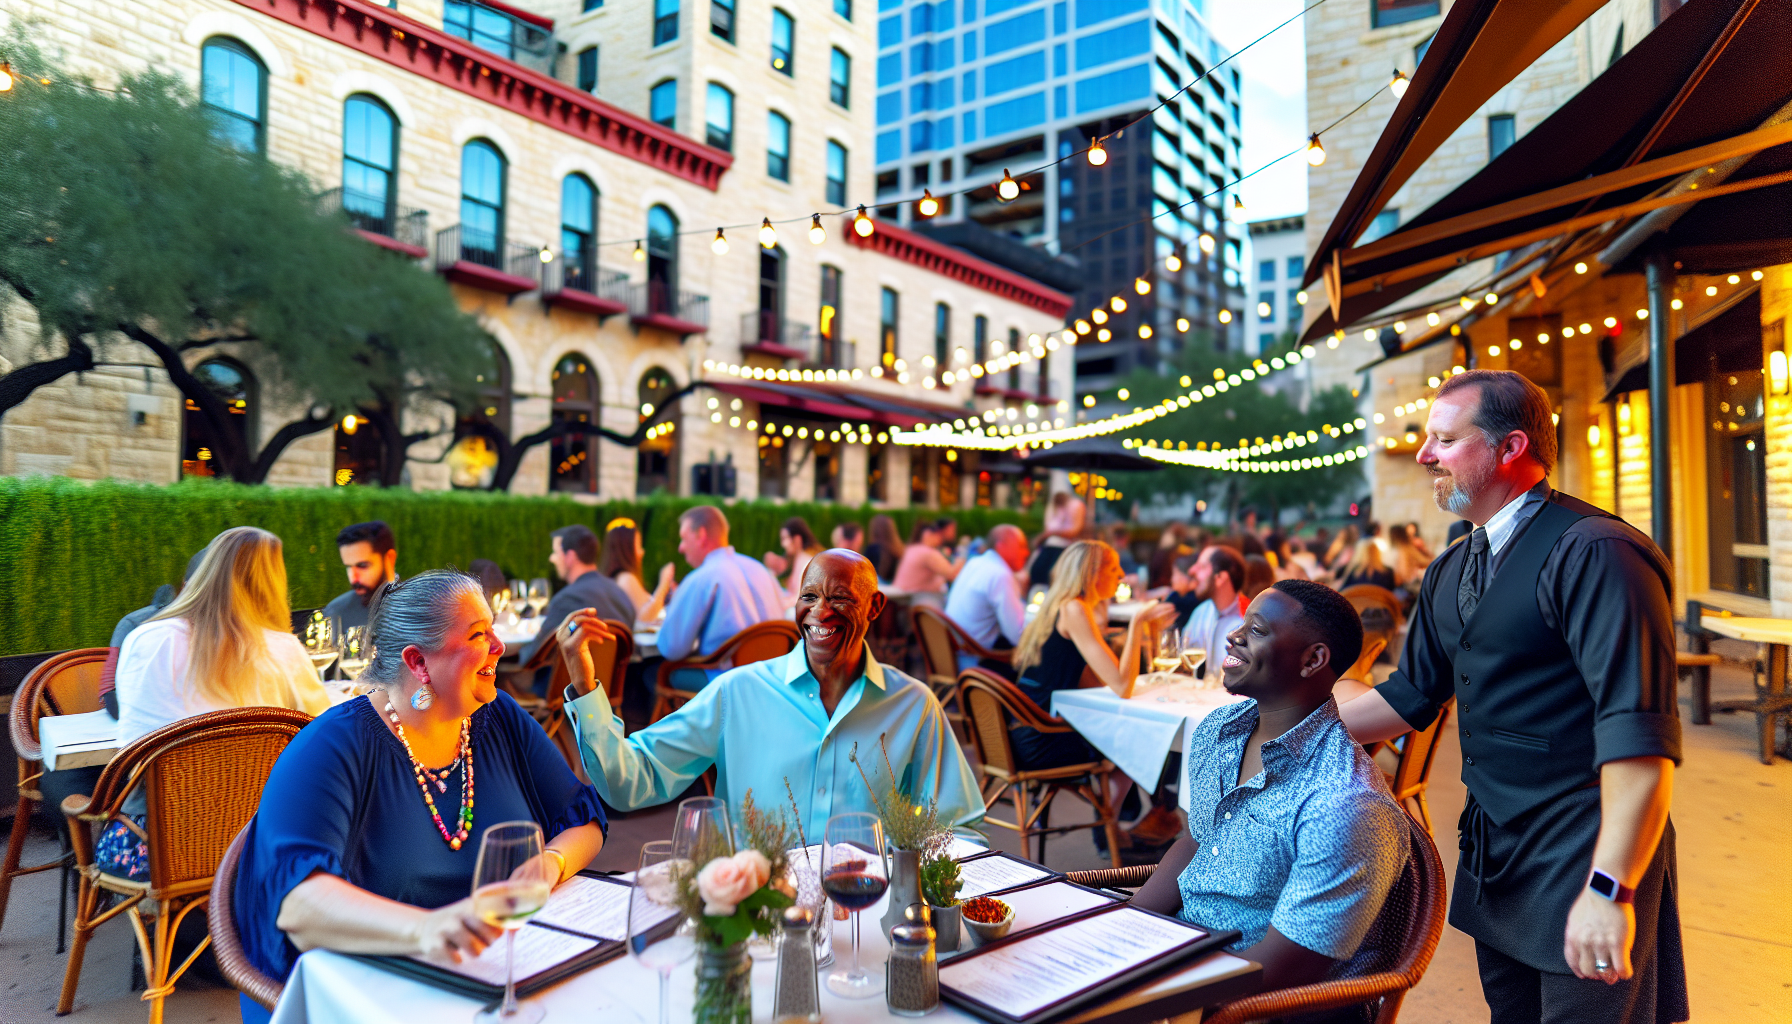 Outdoor dining scene with string lights in downtown Austin